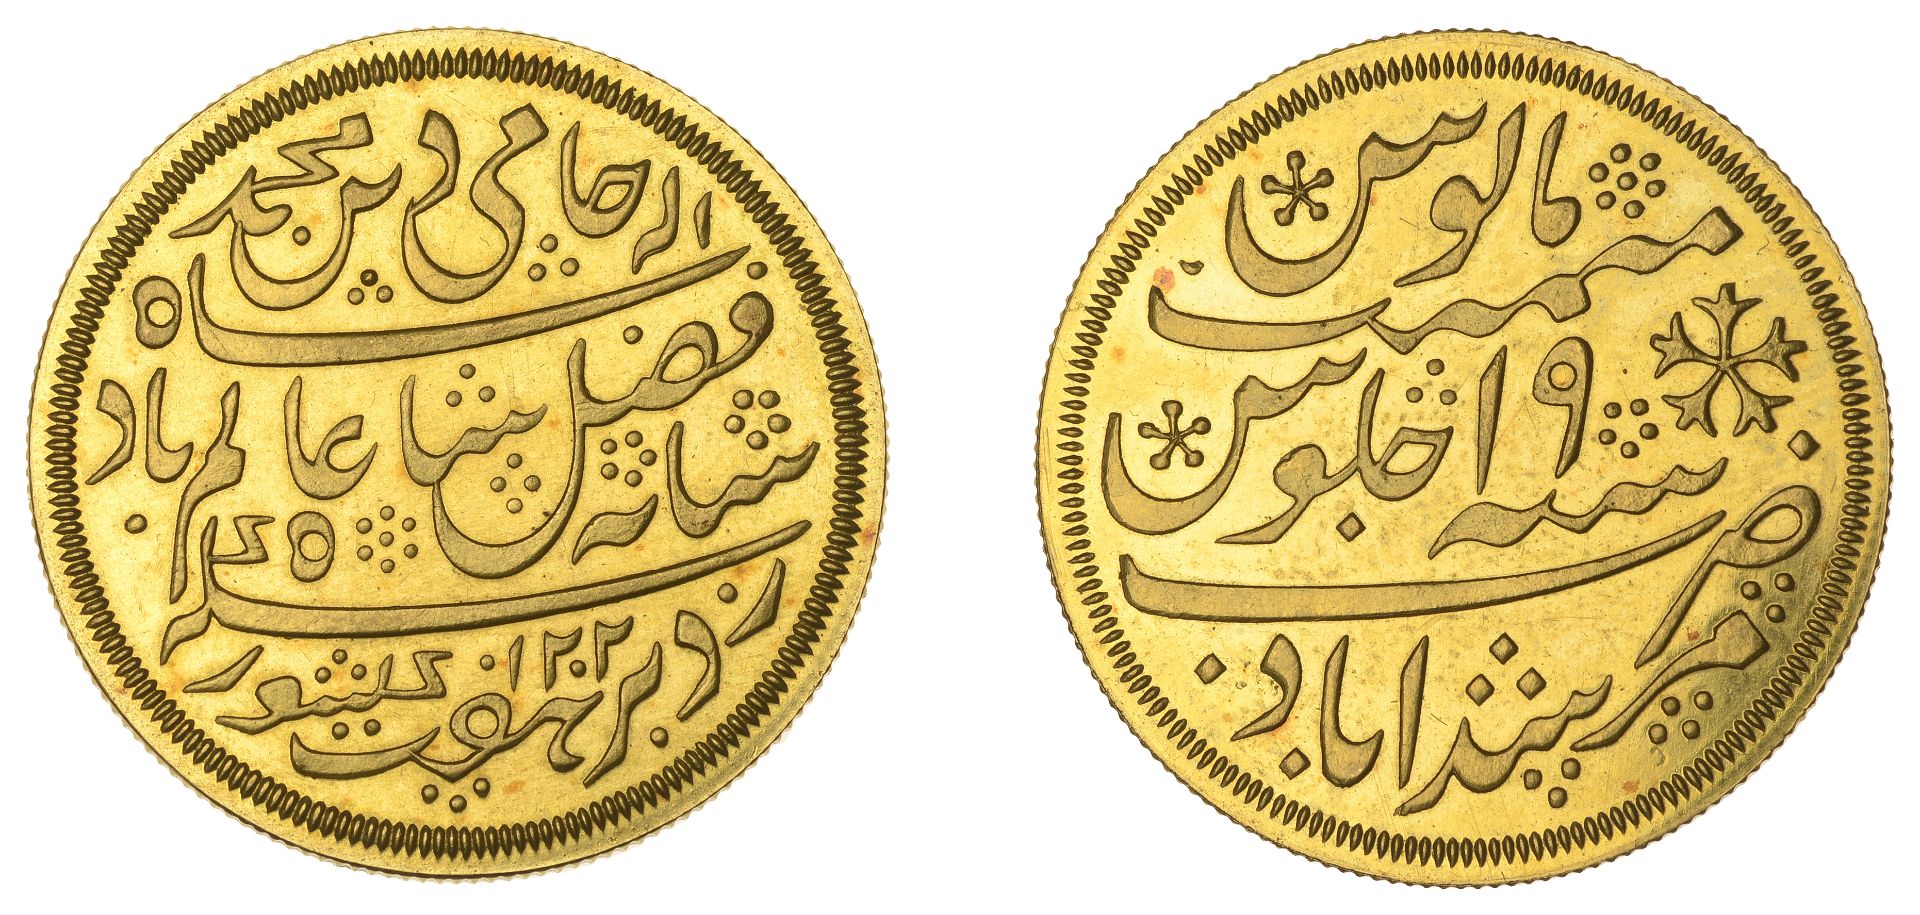 East India Company, Bengal Presidency, Calcutta Mint: Introduction of Steam, gold Pattern Mo...